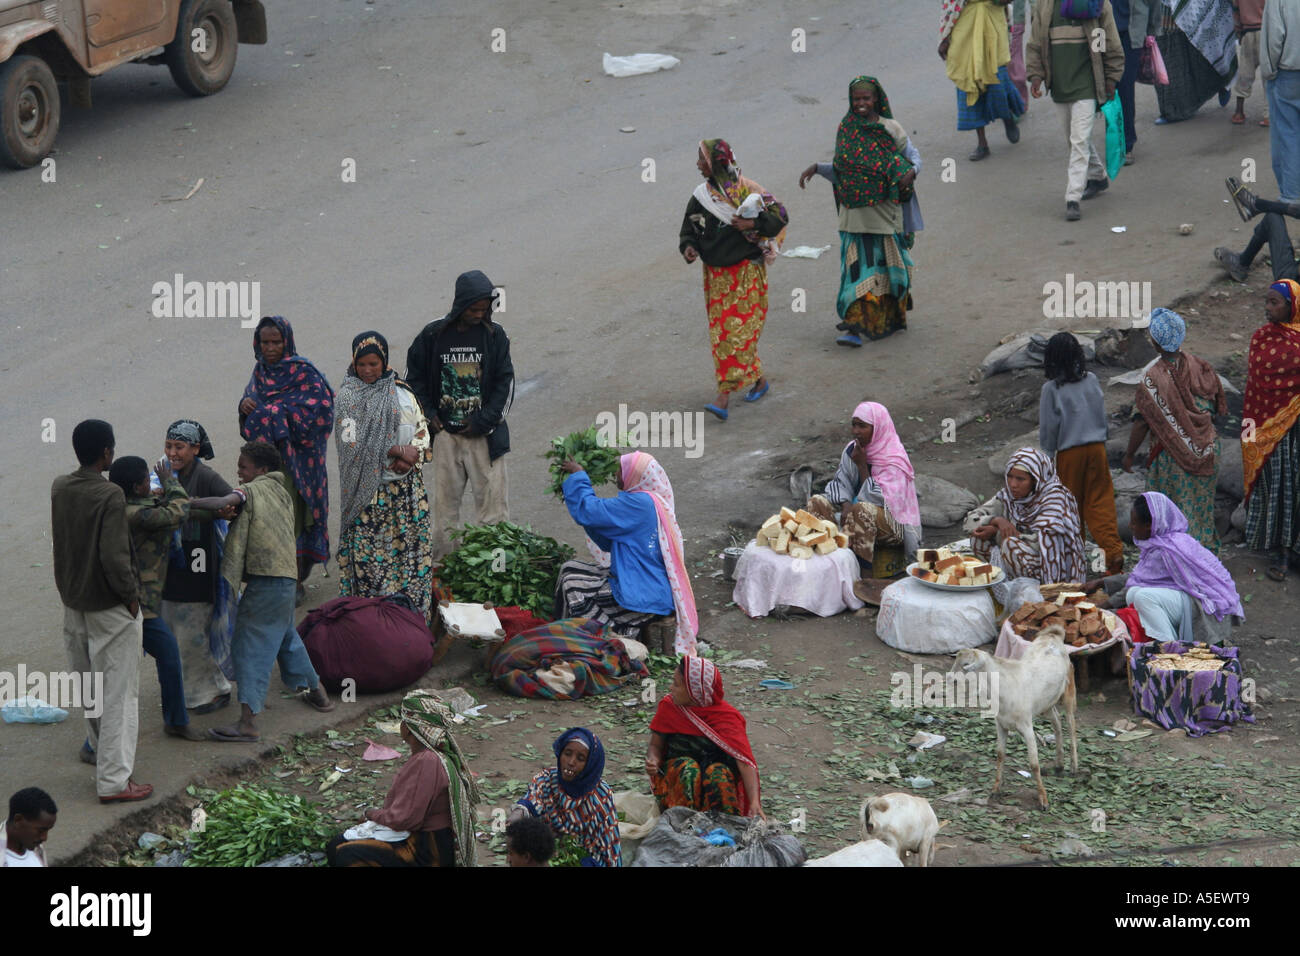 Harar, Ethiopia, women selling bundles of Qat to buyers in the market Stock Photo